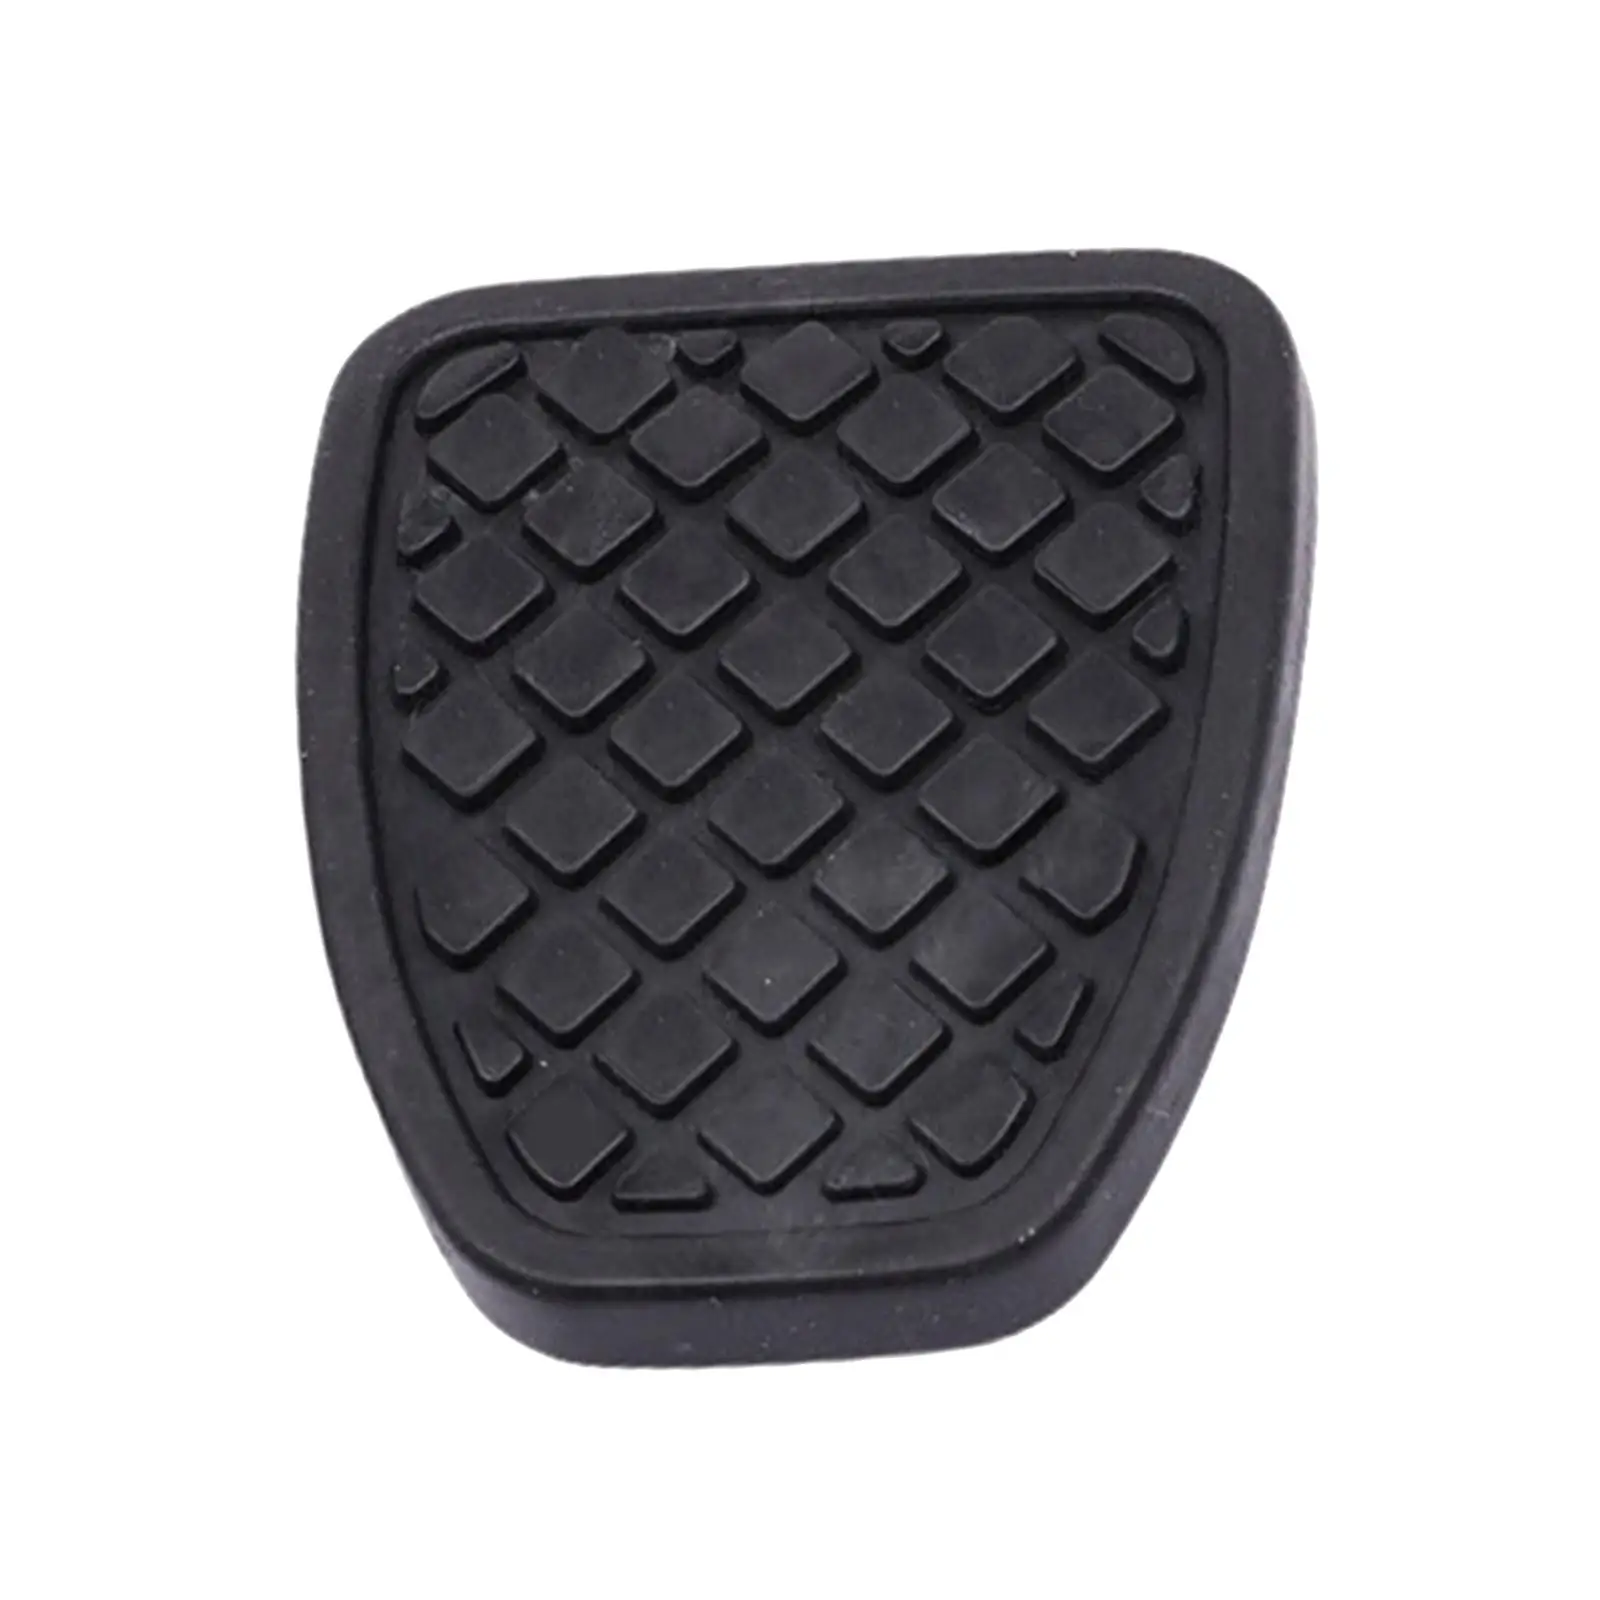 Brake Clutch Pedal Pad Car Accessory High Performance Replace Parts 36015-ga110 for Subaru Impreza Forester Legacy 1996-2017